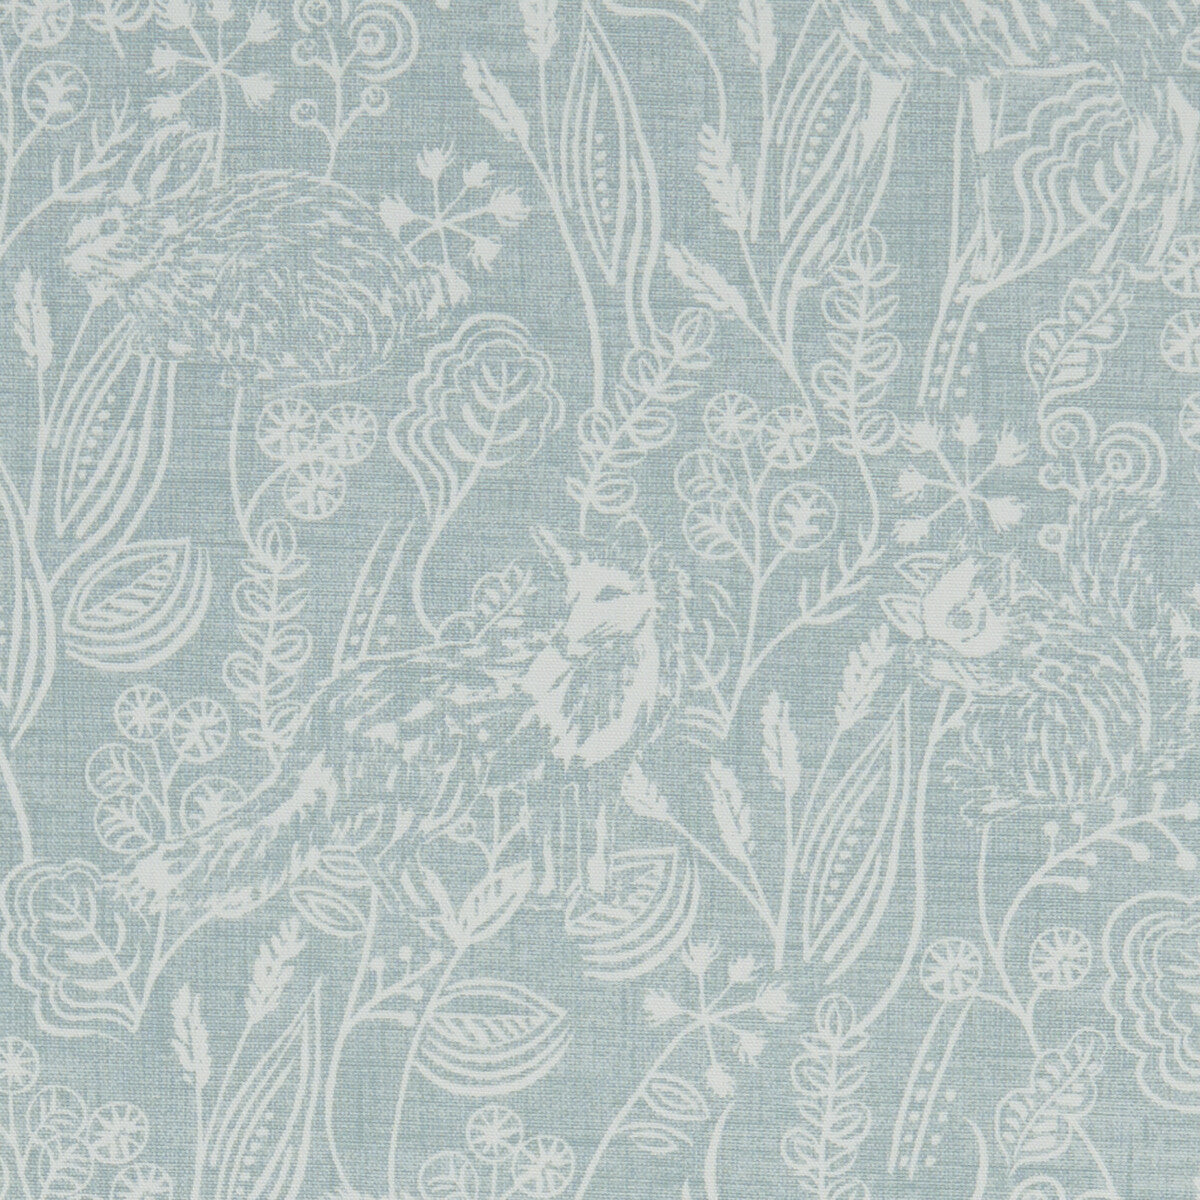 Westleton fabric in duckegg color - pattern F1197/01.CAC.0 - by Clarke And Clarke in the Land &amp; Sea By Studio G For C&amp;C collection